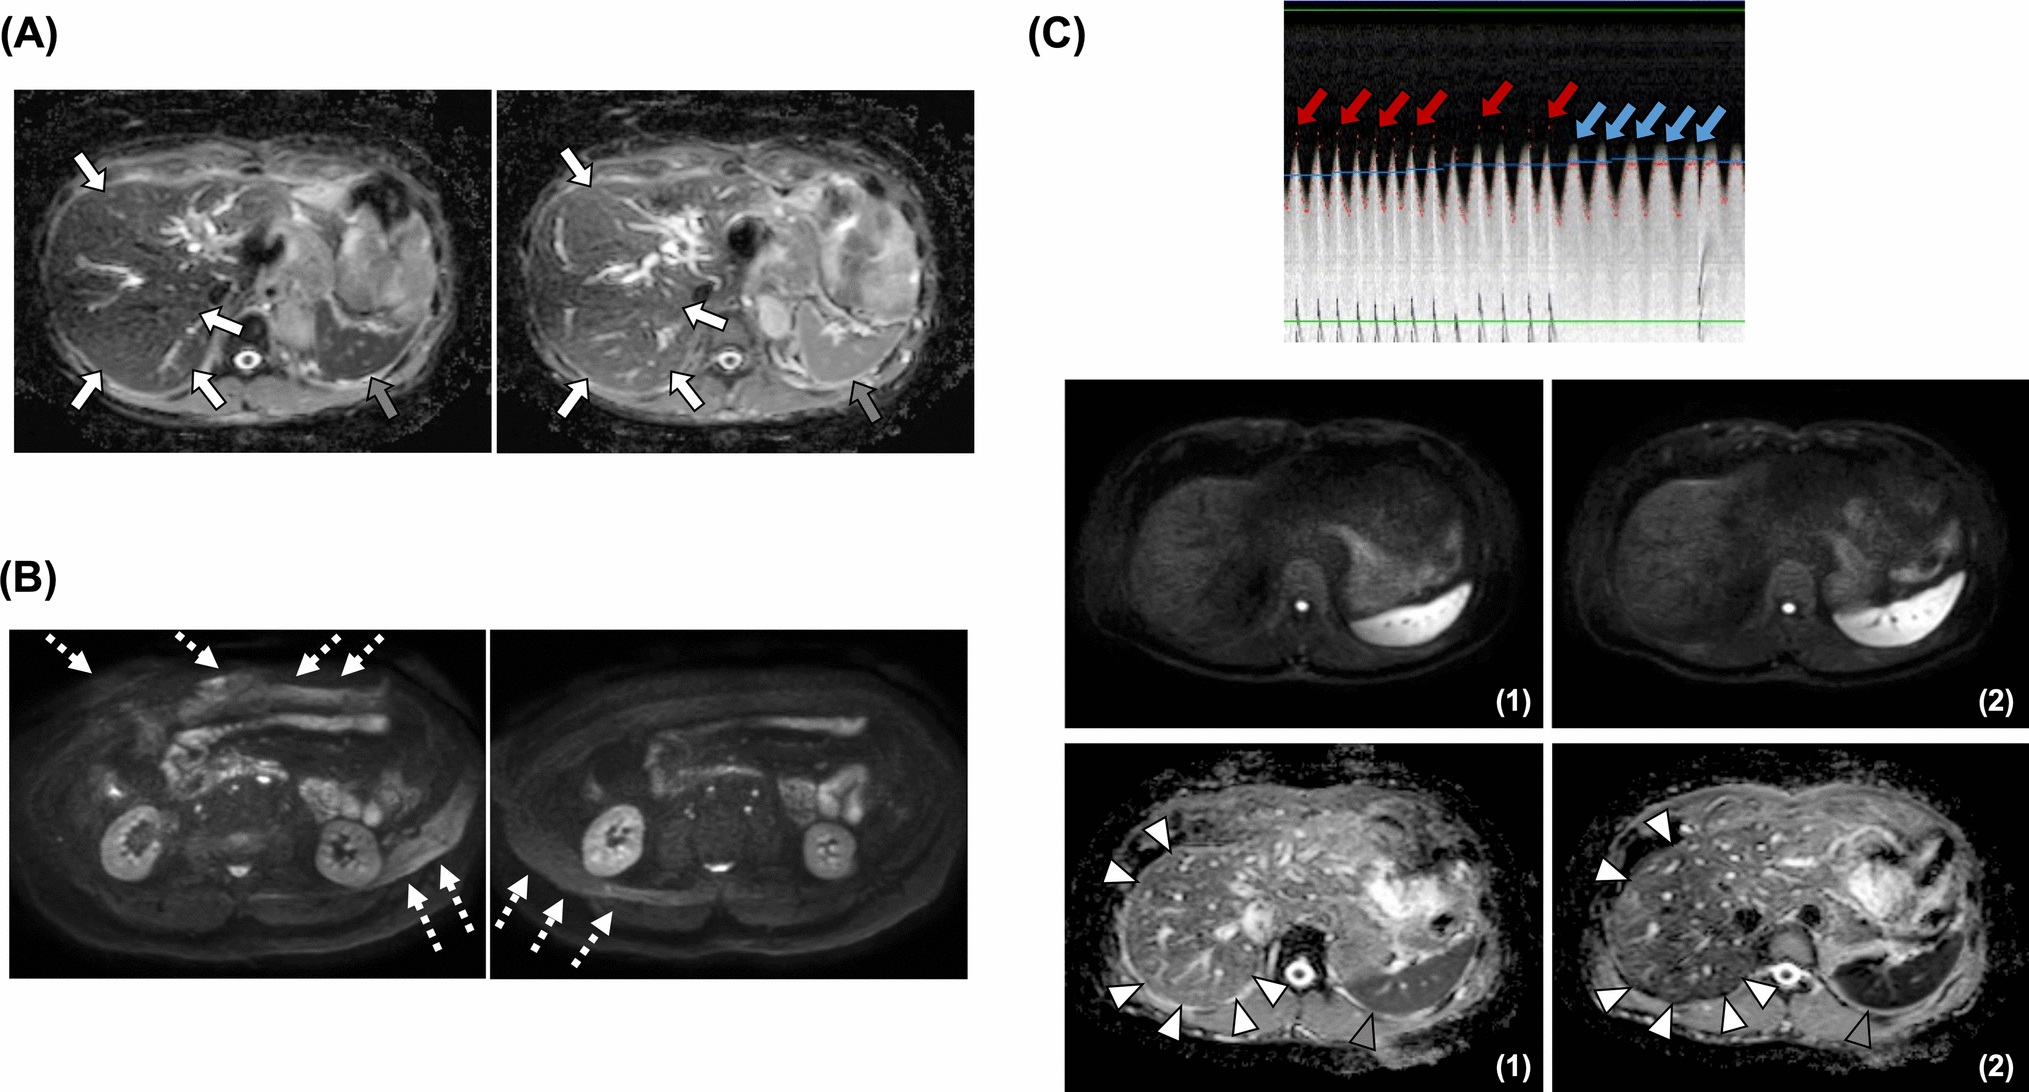 Diffusion weighted imaging combining respiratory triggering and navigator echo tracking in the upper abdomen